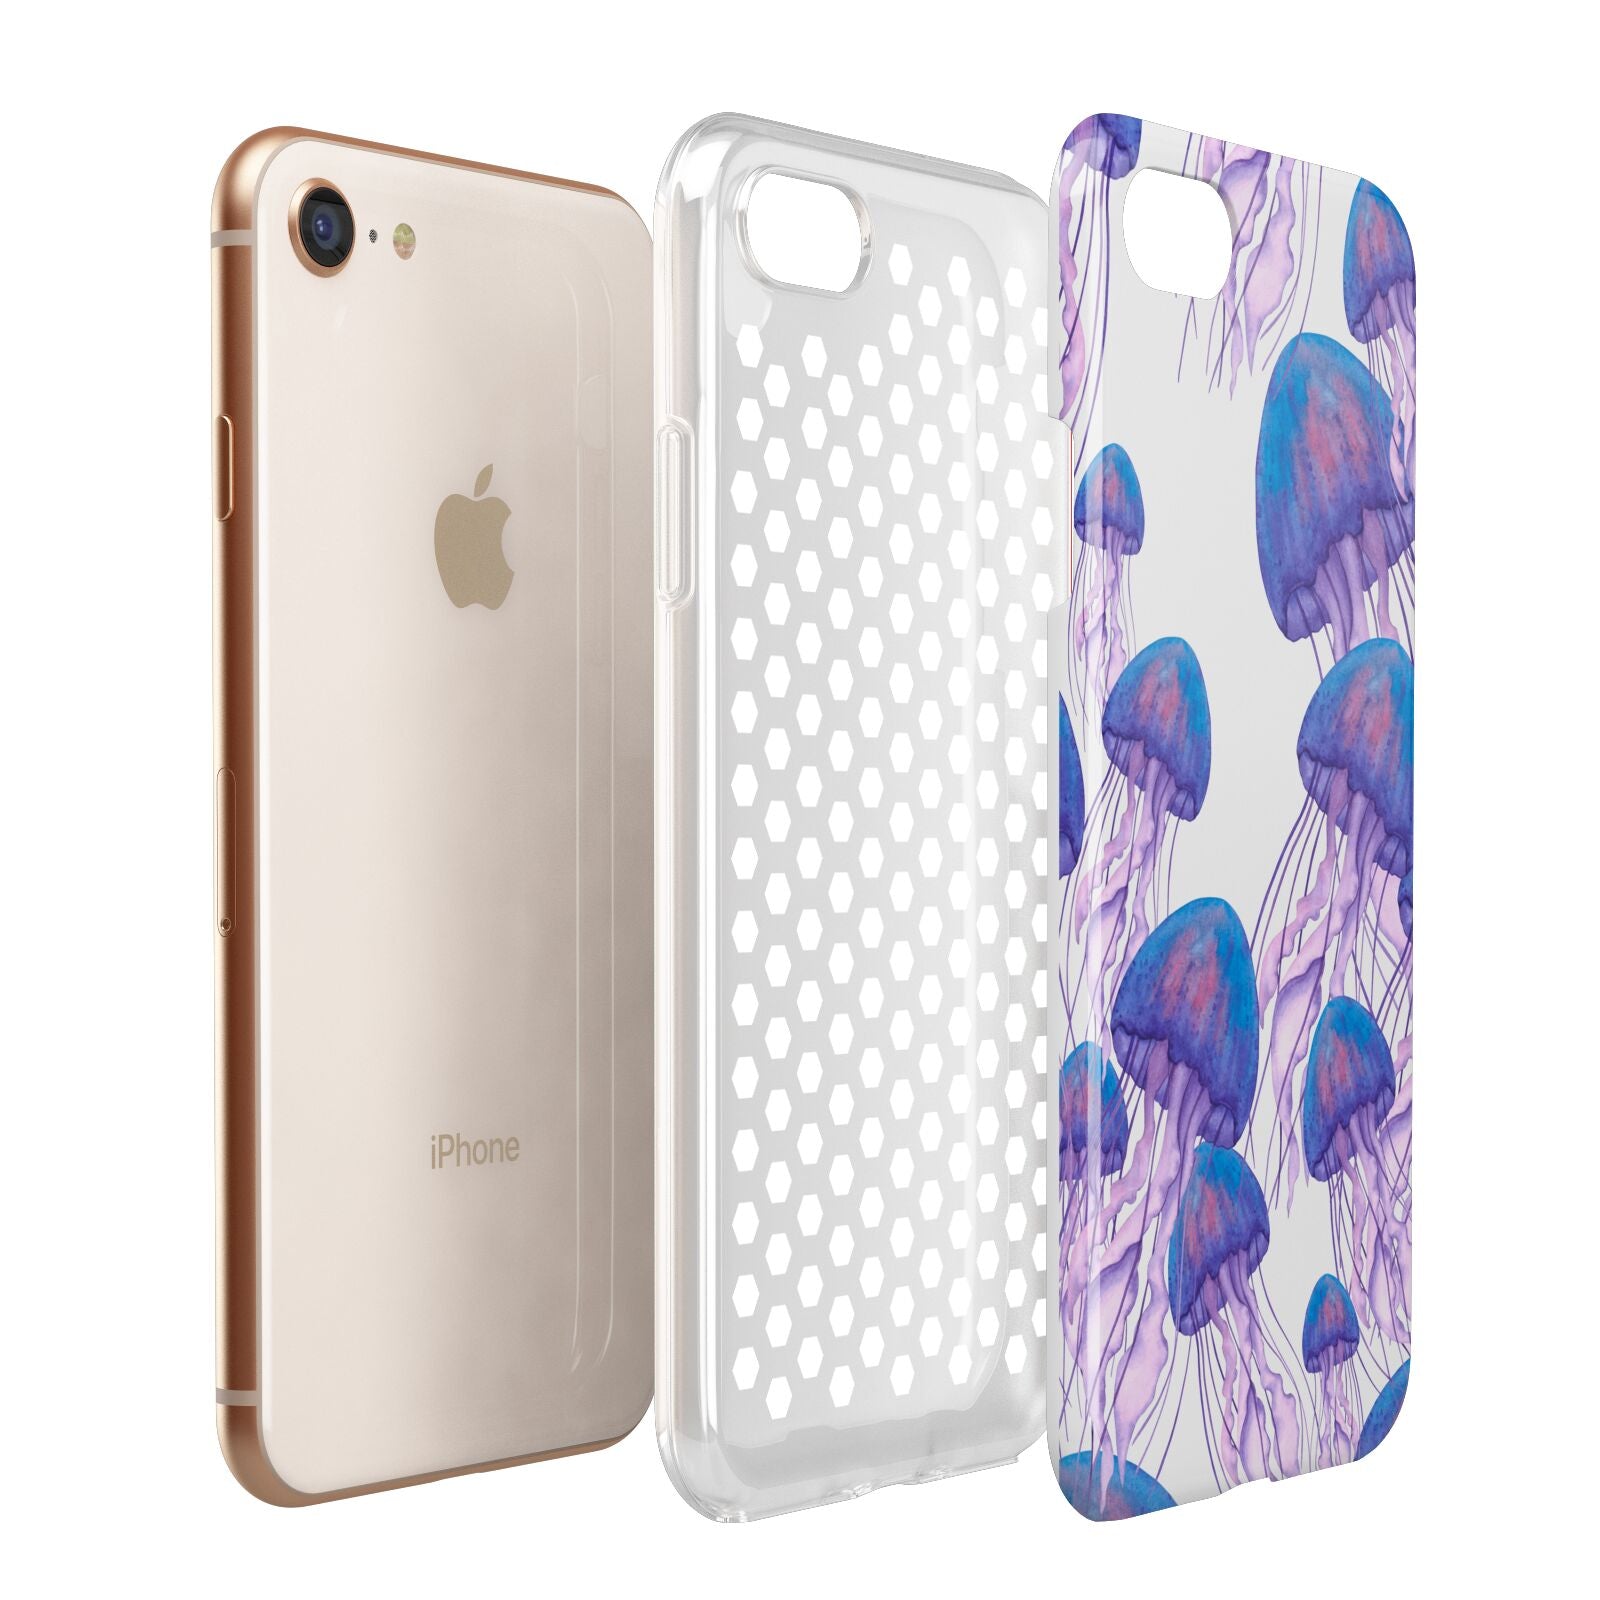 Jellyfish Apple iPhone 7 8 3D Tough Case Expanded View